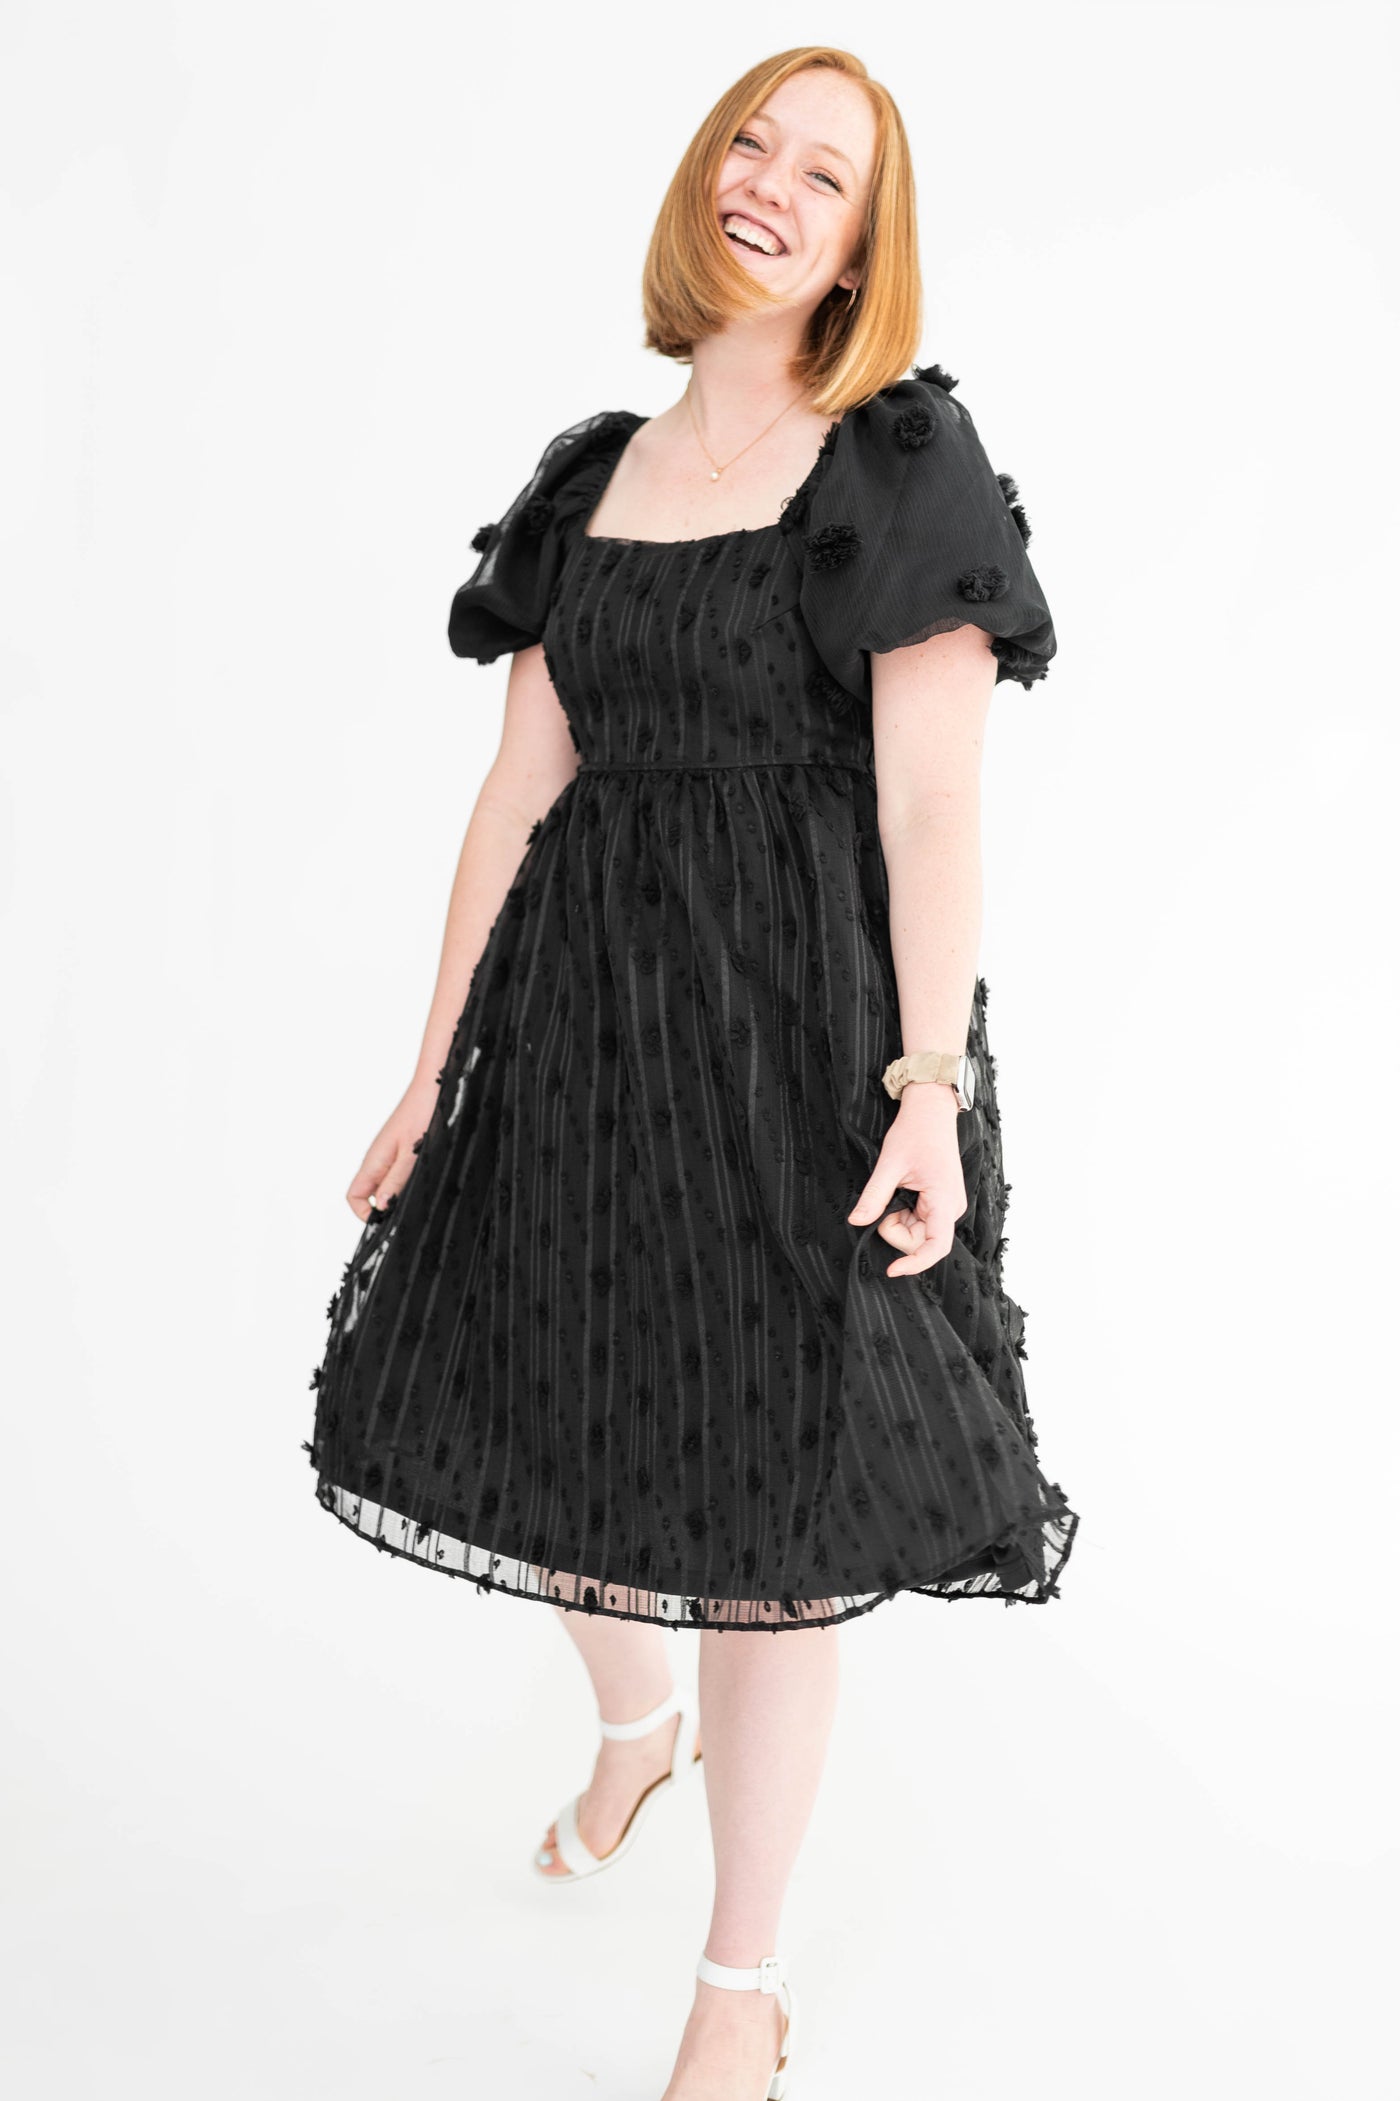 Medium black dress with short sleeves and square neck